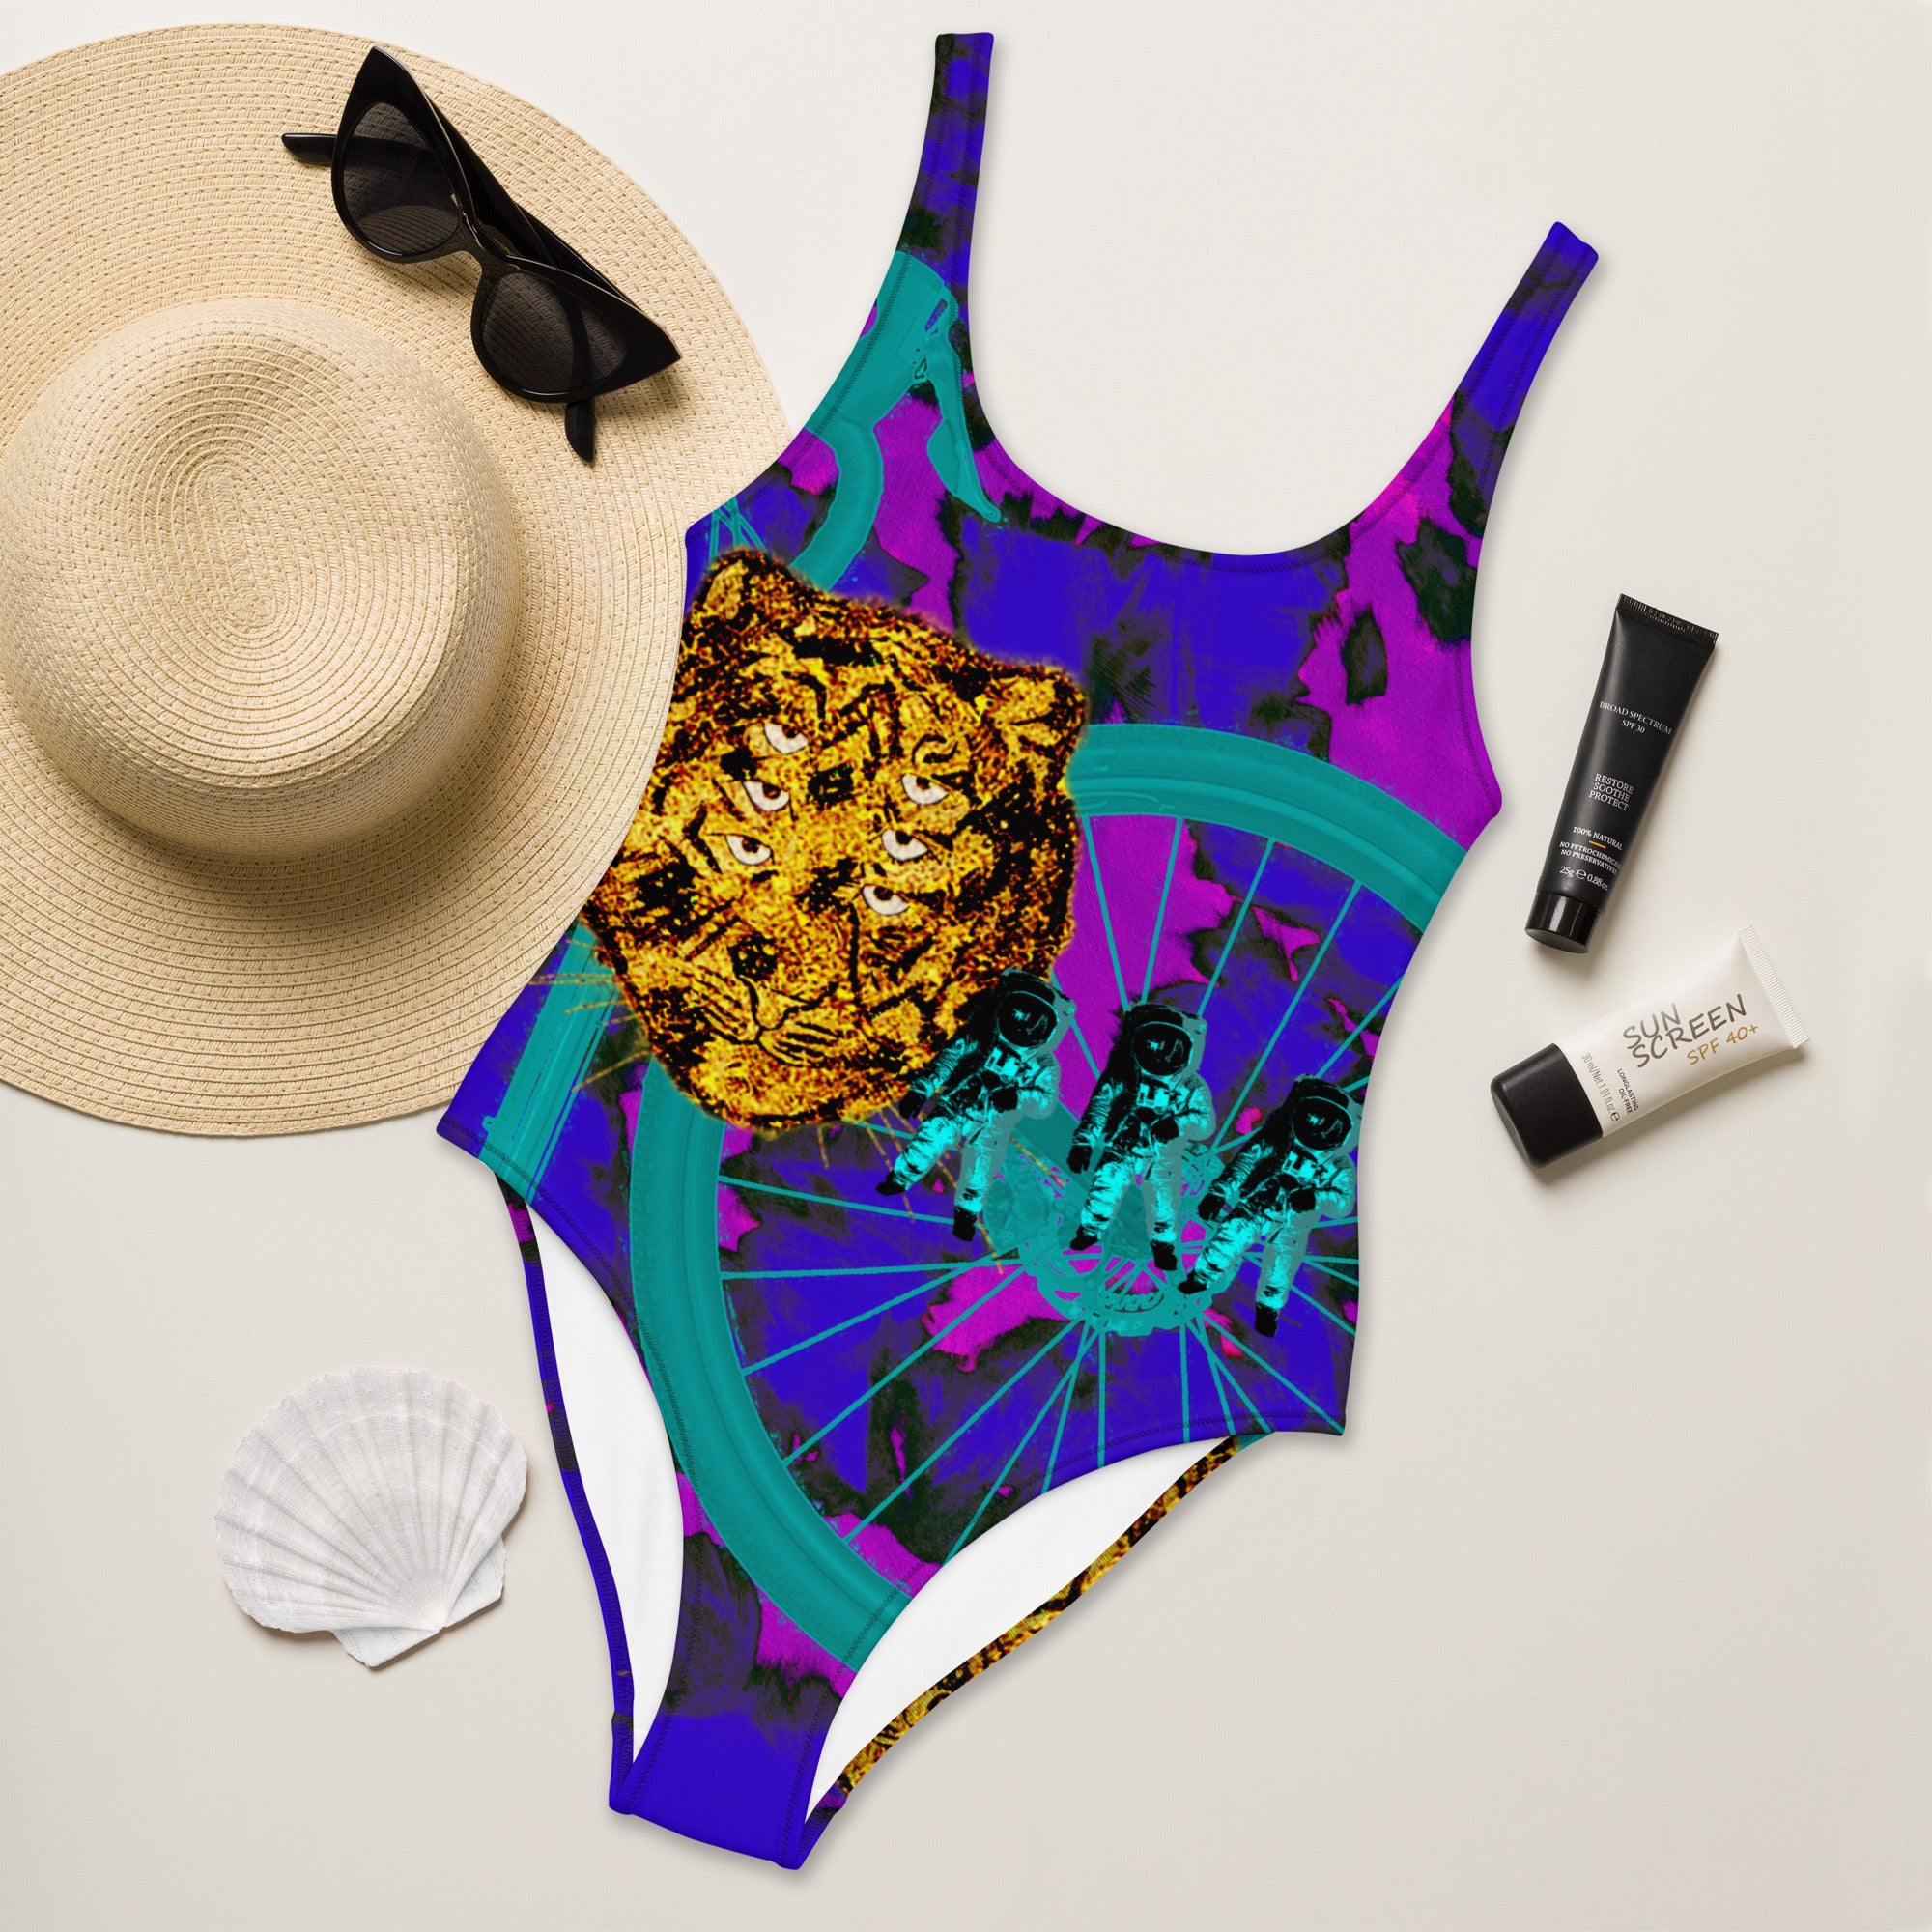 The Jeff 7.0 One-Piece Swimsuit